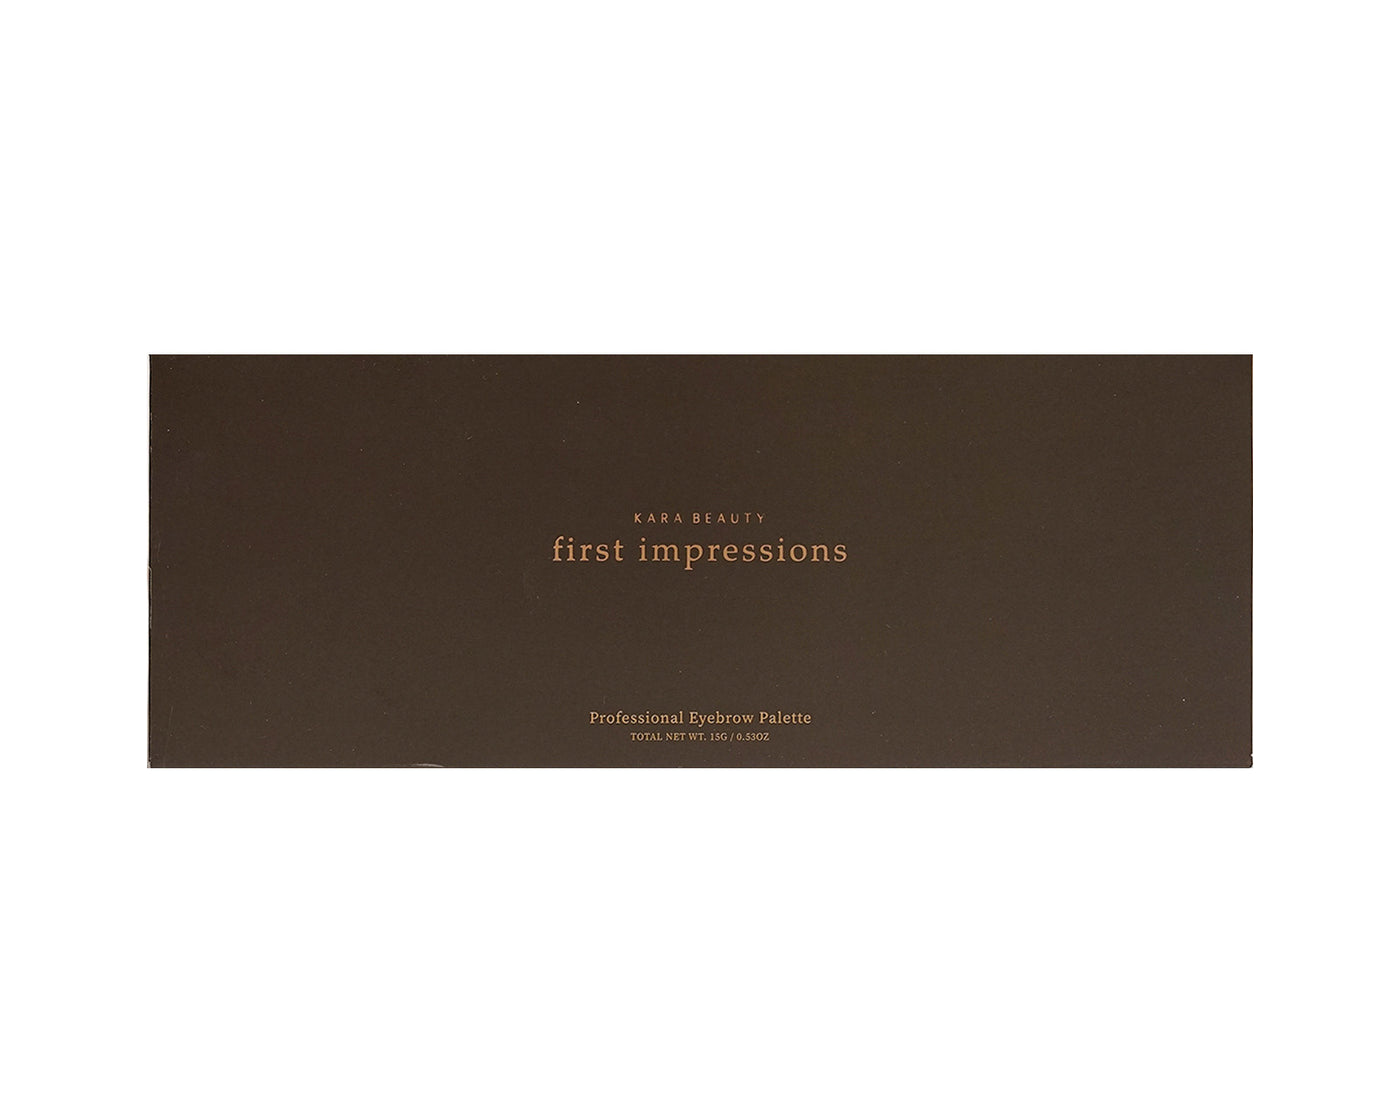 FIRST IMPRESSIONS Professional Eyebrow Palette